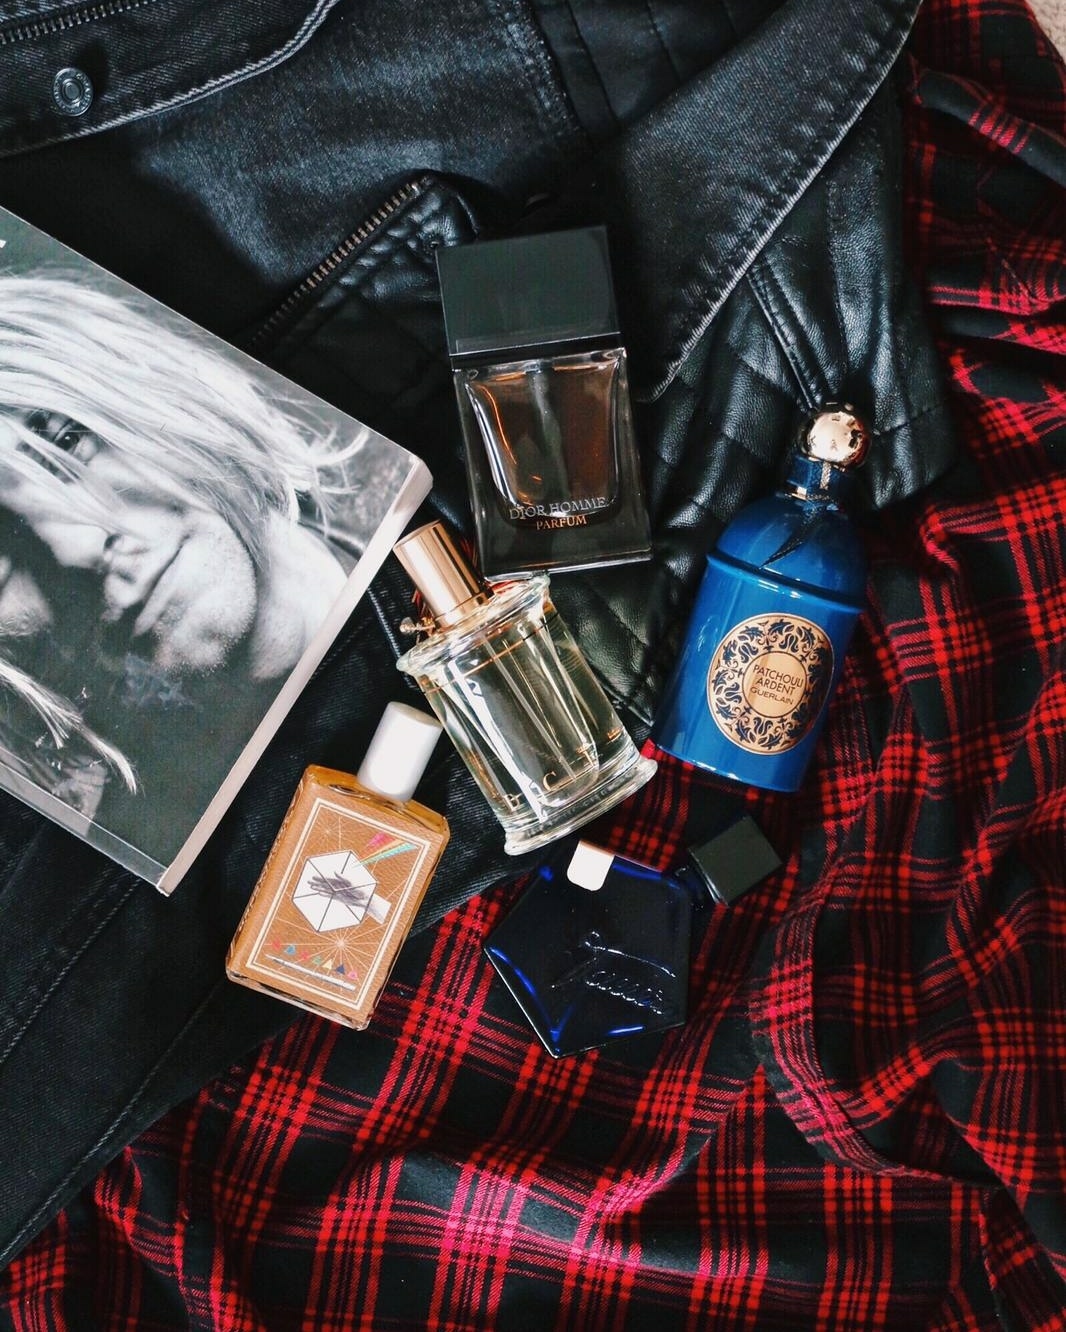 Smell of Grunge!